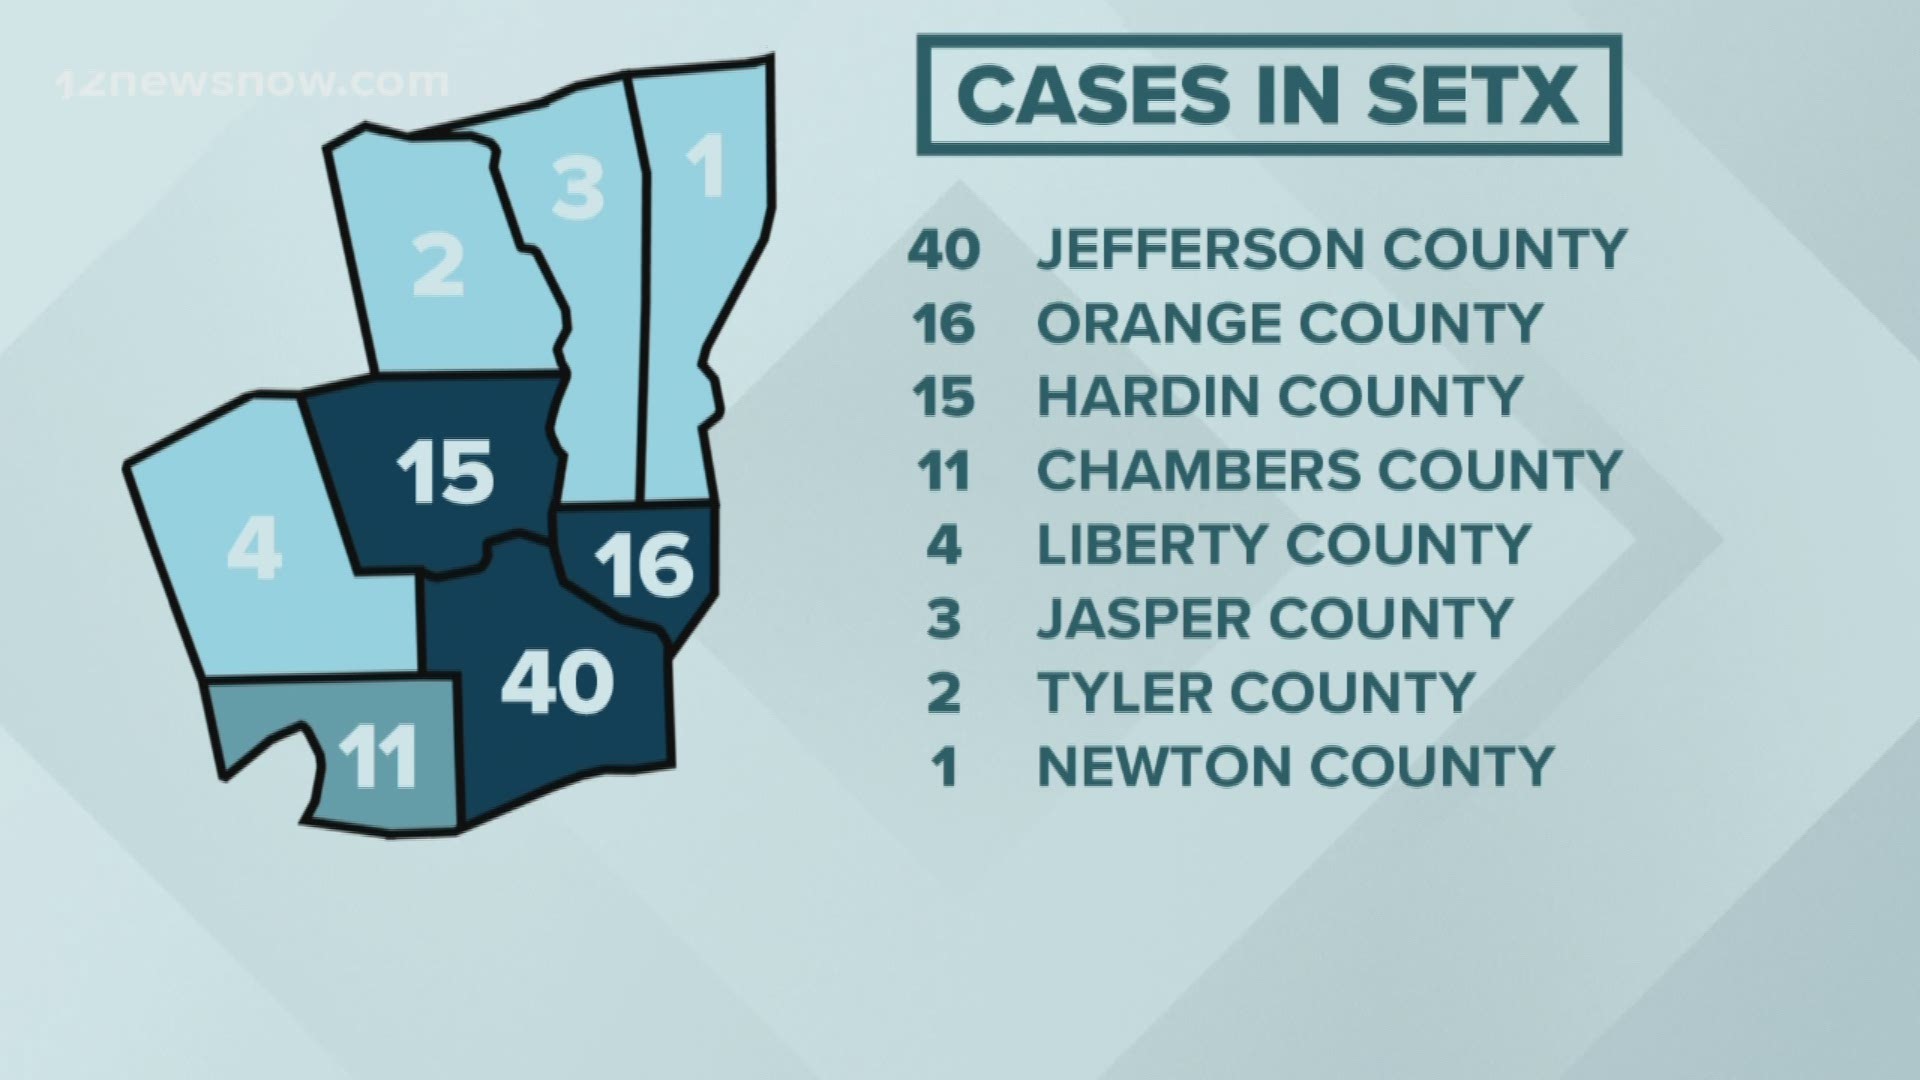 Southeast Texas has 92 confirmed cases in the eight counties 12News is tracking